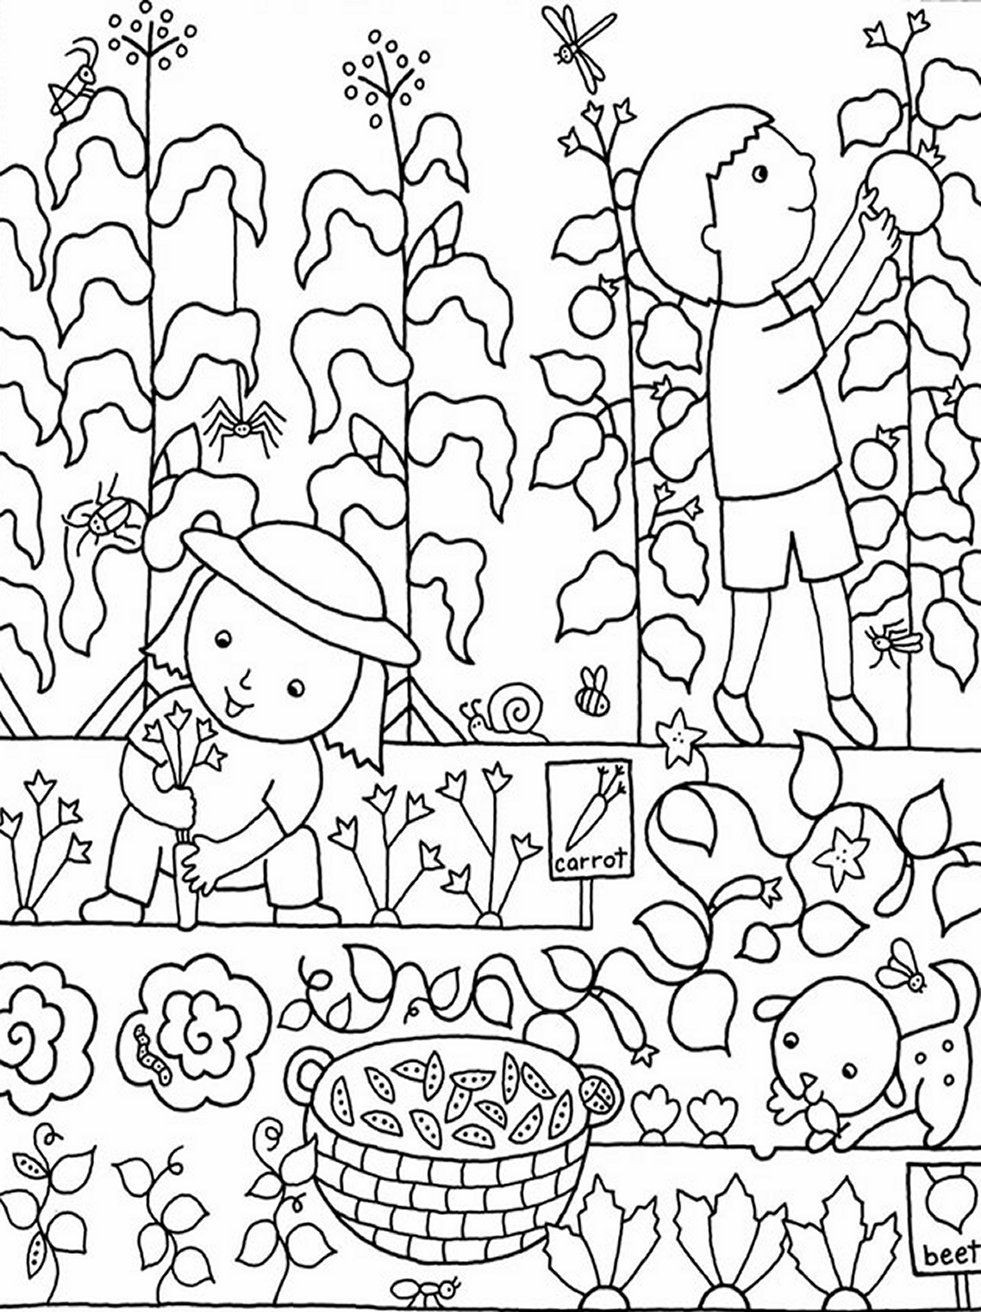 Gaden Week Preschool Coloring Sheets
 Kids Gardening Coloring Pages Free Colouring to